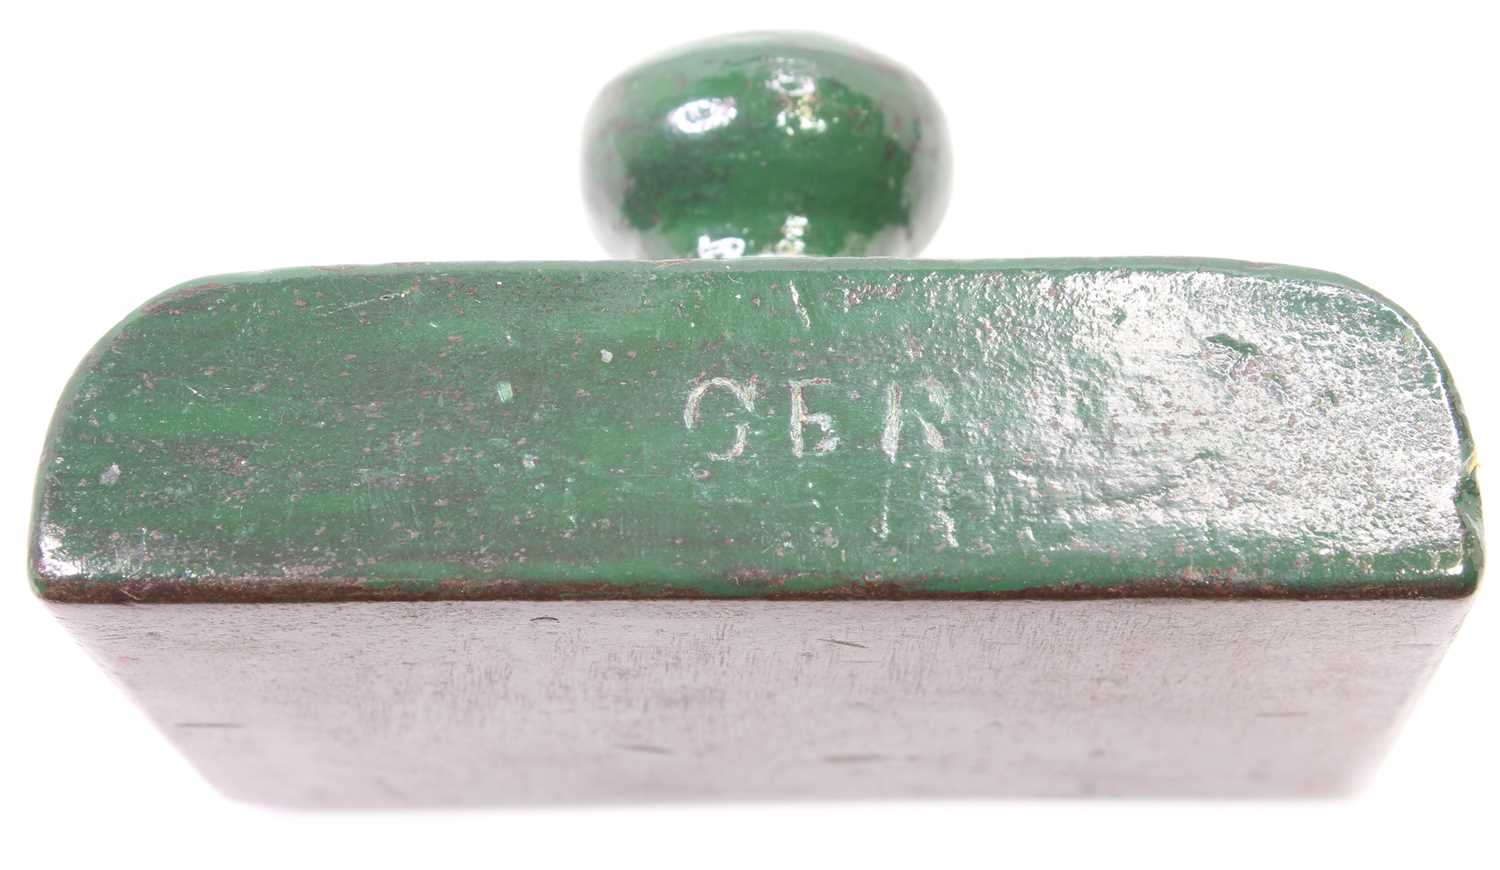 GER Interest item group to include Paperweight and Coat Hanger, both marked GER - Bild 3 aus 3